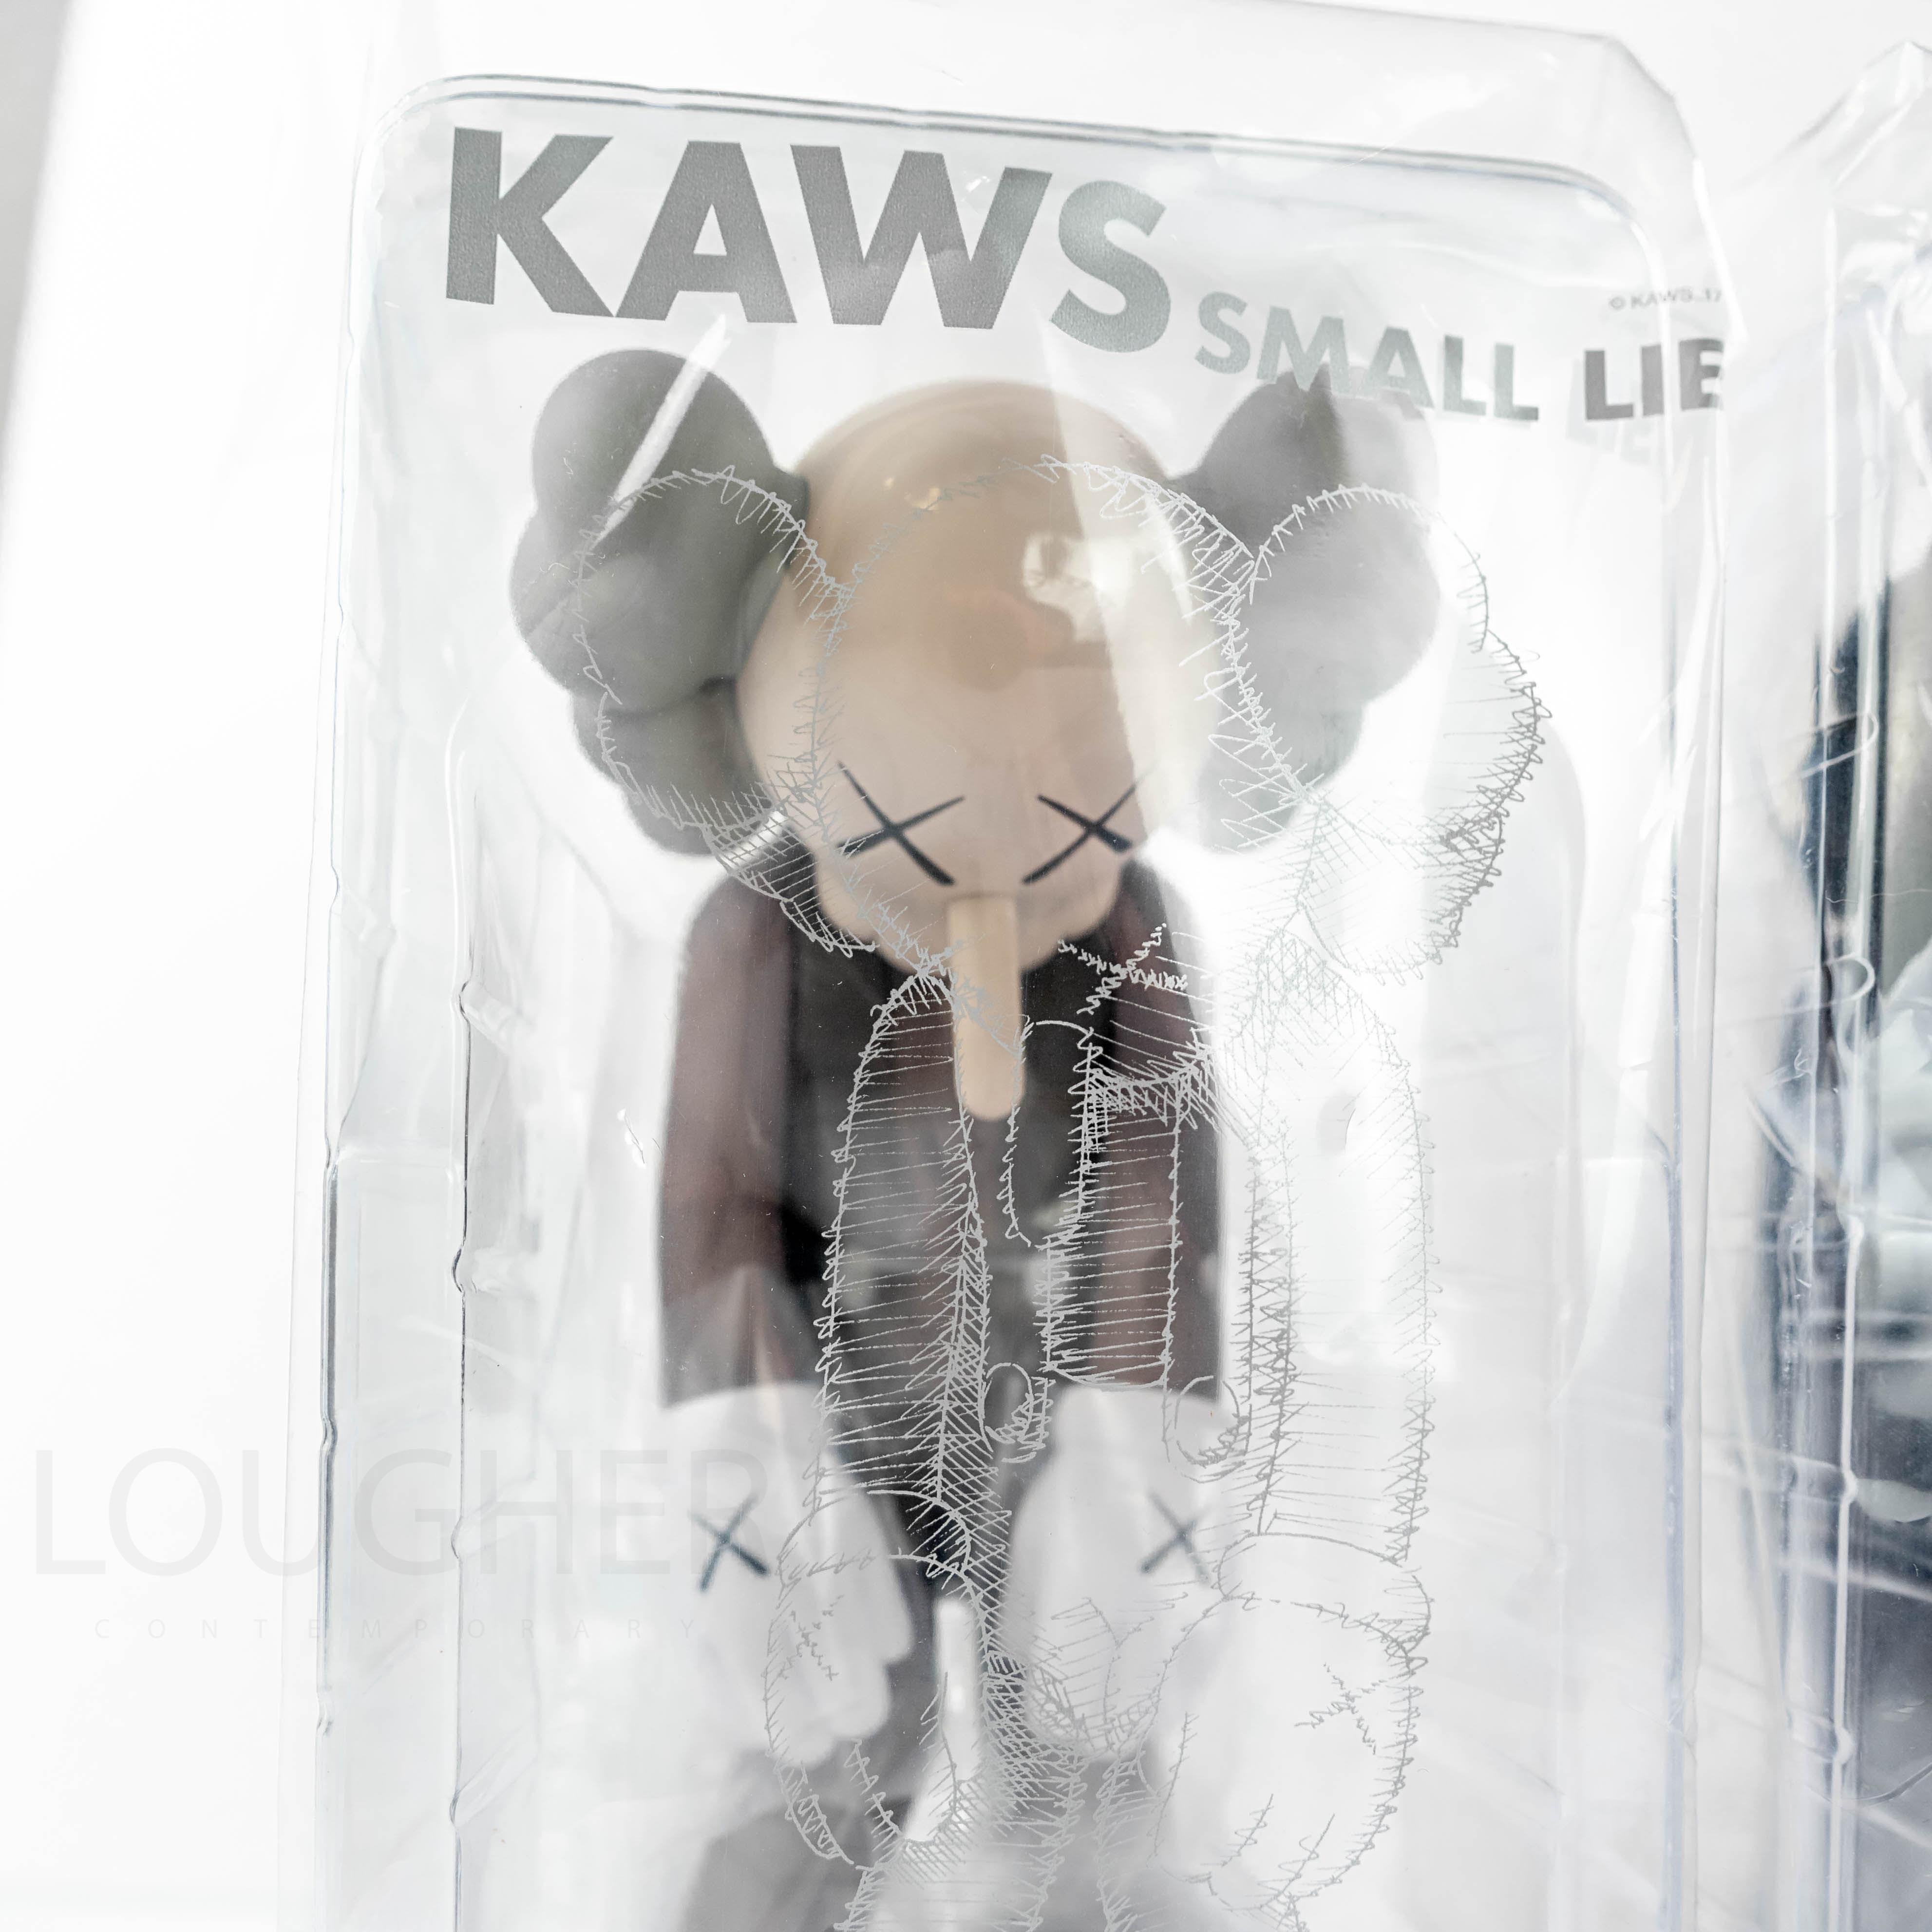 Small Lie (Set Of Three) - Contemporary Sculpture by KAWS